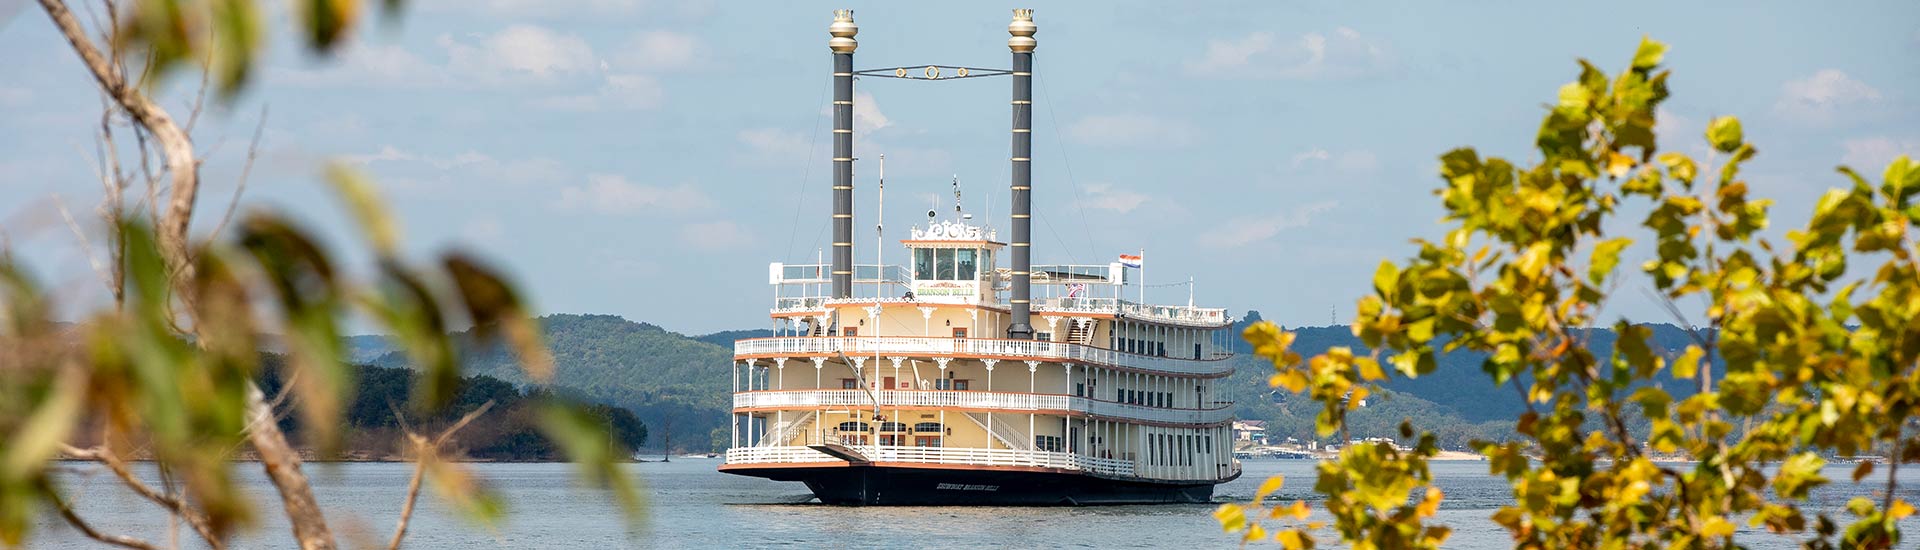 Branson Belle Showboat on Table Rock Lake framed by trees in foreground and Branson hills in background.